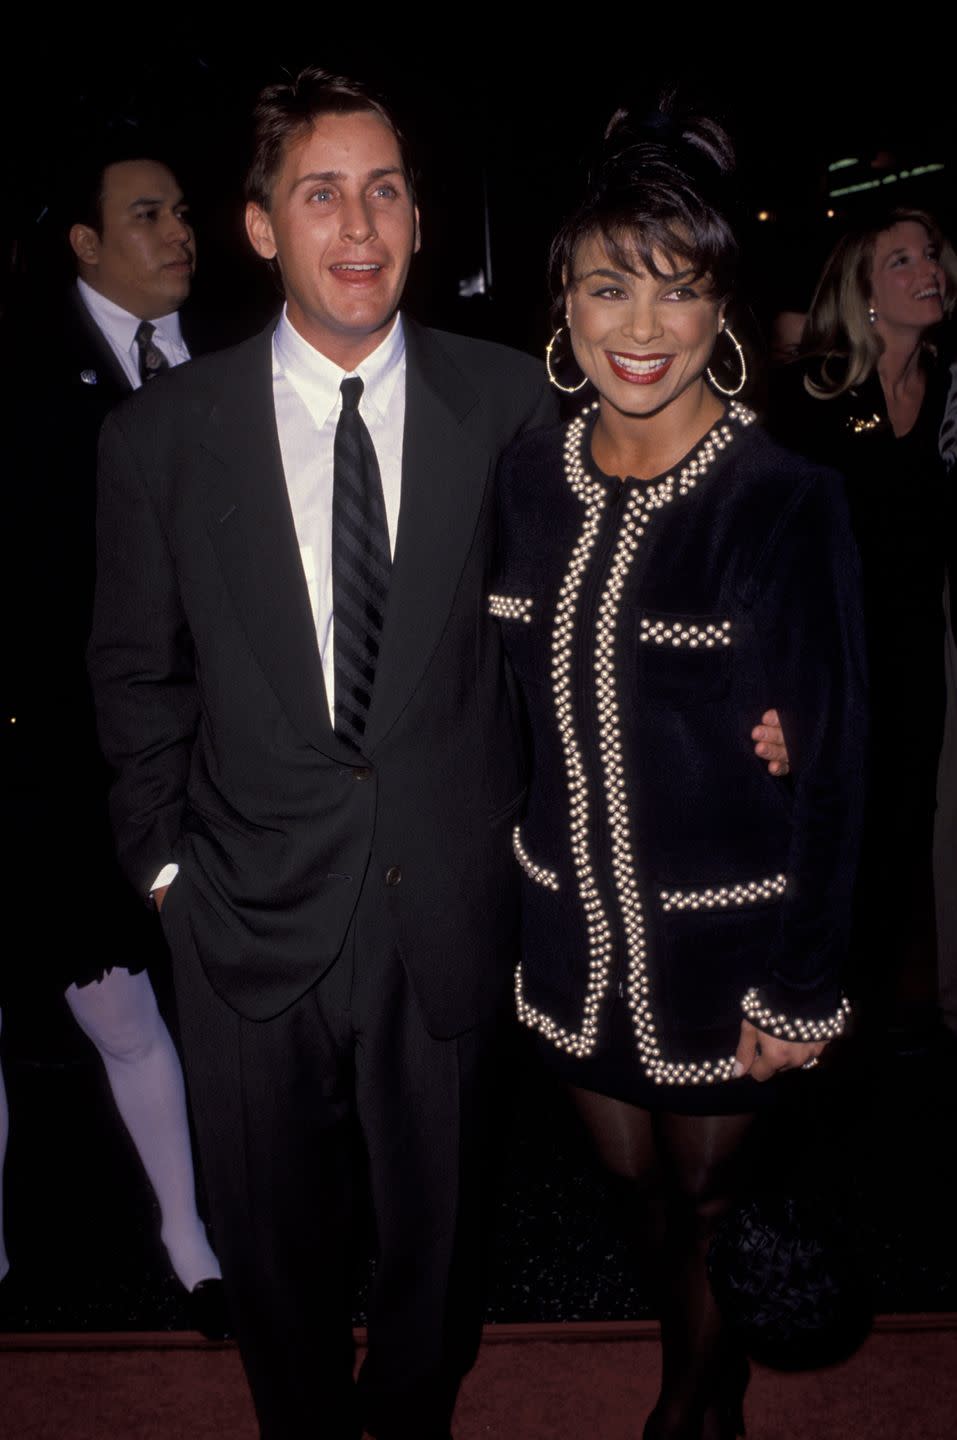 <p>For those of you who don’t know, before Paula Abdul’s name was synonymous with American Idol, she was a big pop star in the ’80s and ’90s and she was married to another ’80s star, Brat Pack member Emilio. (Emilio is also Martin Sheen’s oldest son and Demi Moore’s former fiancé, so there’s that.) The couple got married in Santa Monica in 1992 but divorced two years later, reportedly because Paula wanted kids and Emilio (who already had two) didn’t. <a href="https://ew.com/article/1998/04/24/paula-abdul-and-emilio-estevez-together-forever/" rel="nofollow noopener" target="_blank" data-ylk="slk:Paula told People" class="link ">Paula told People</a>, “It was very hard for him to admit that he couldn’t handle having kids again. It was heartbreaking for us both.”</p>